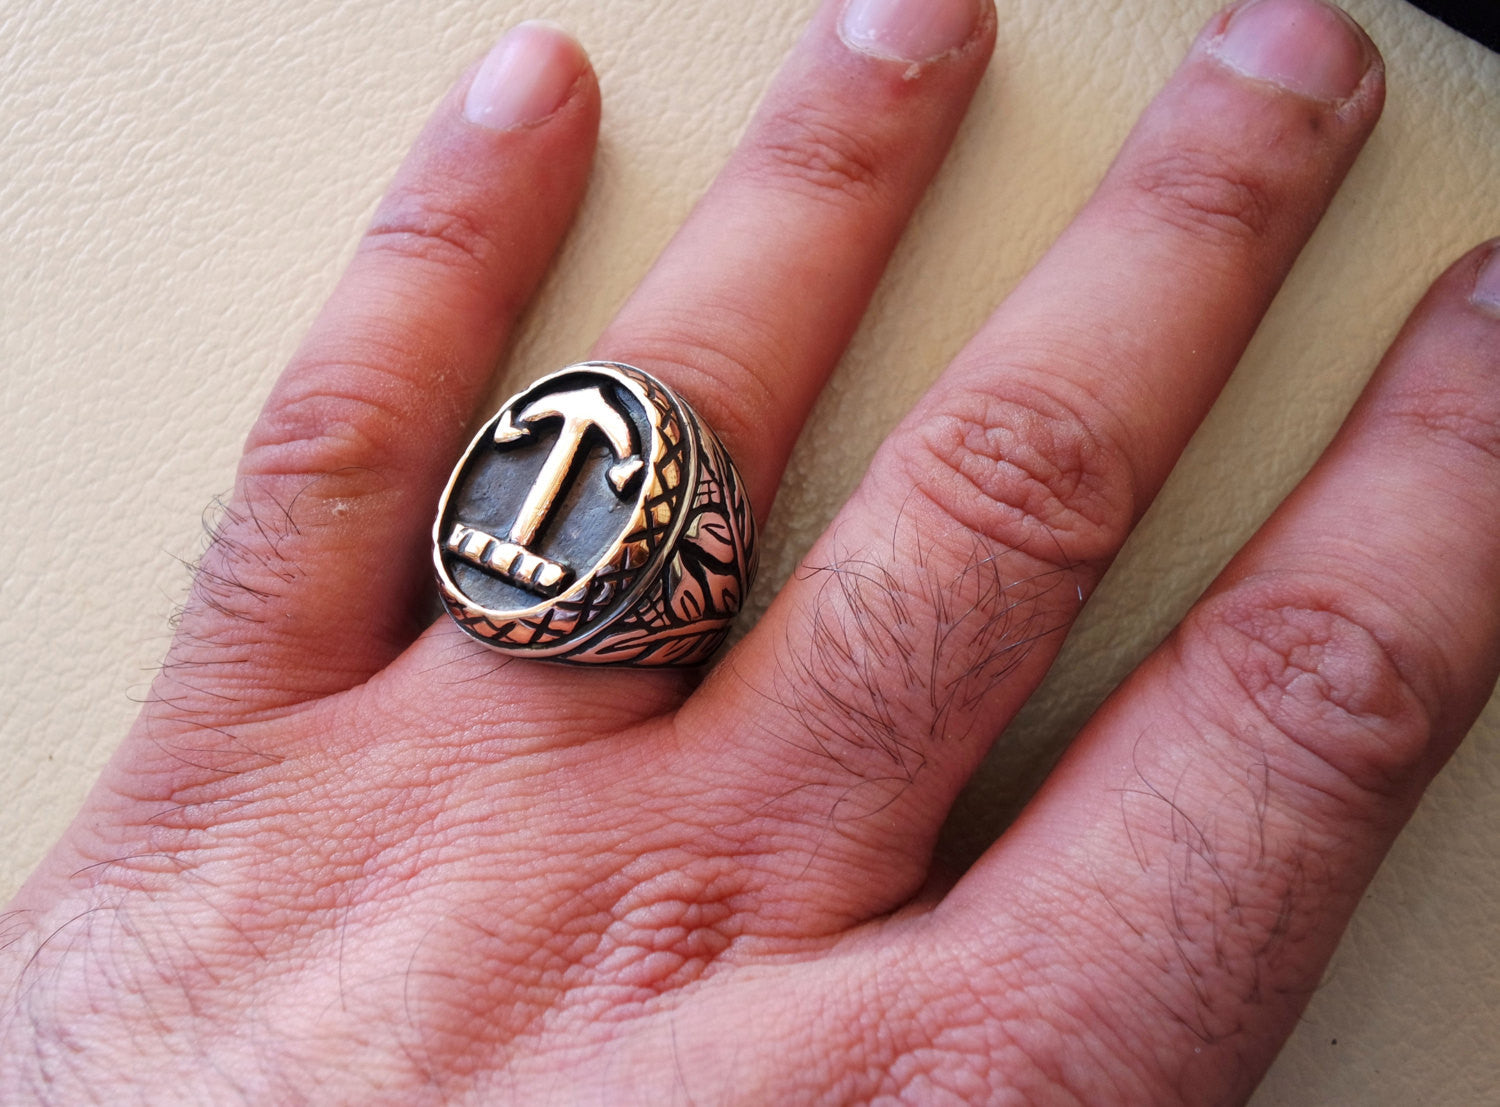 Big anchor sailor biker men ring heavy sterling silver 925 sea symbol flowers and bronze handmade all sizes jewelry fast shipping